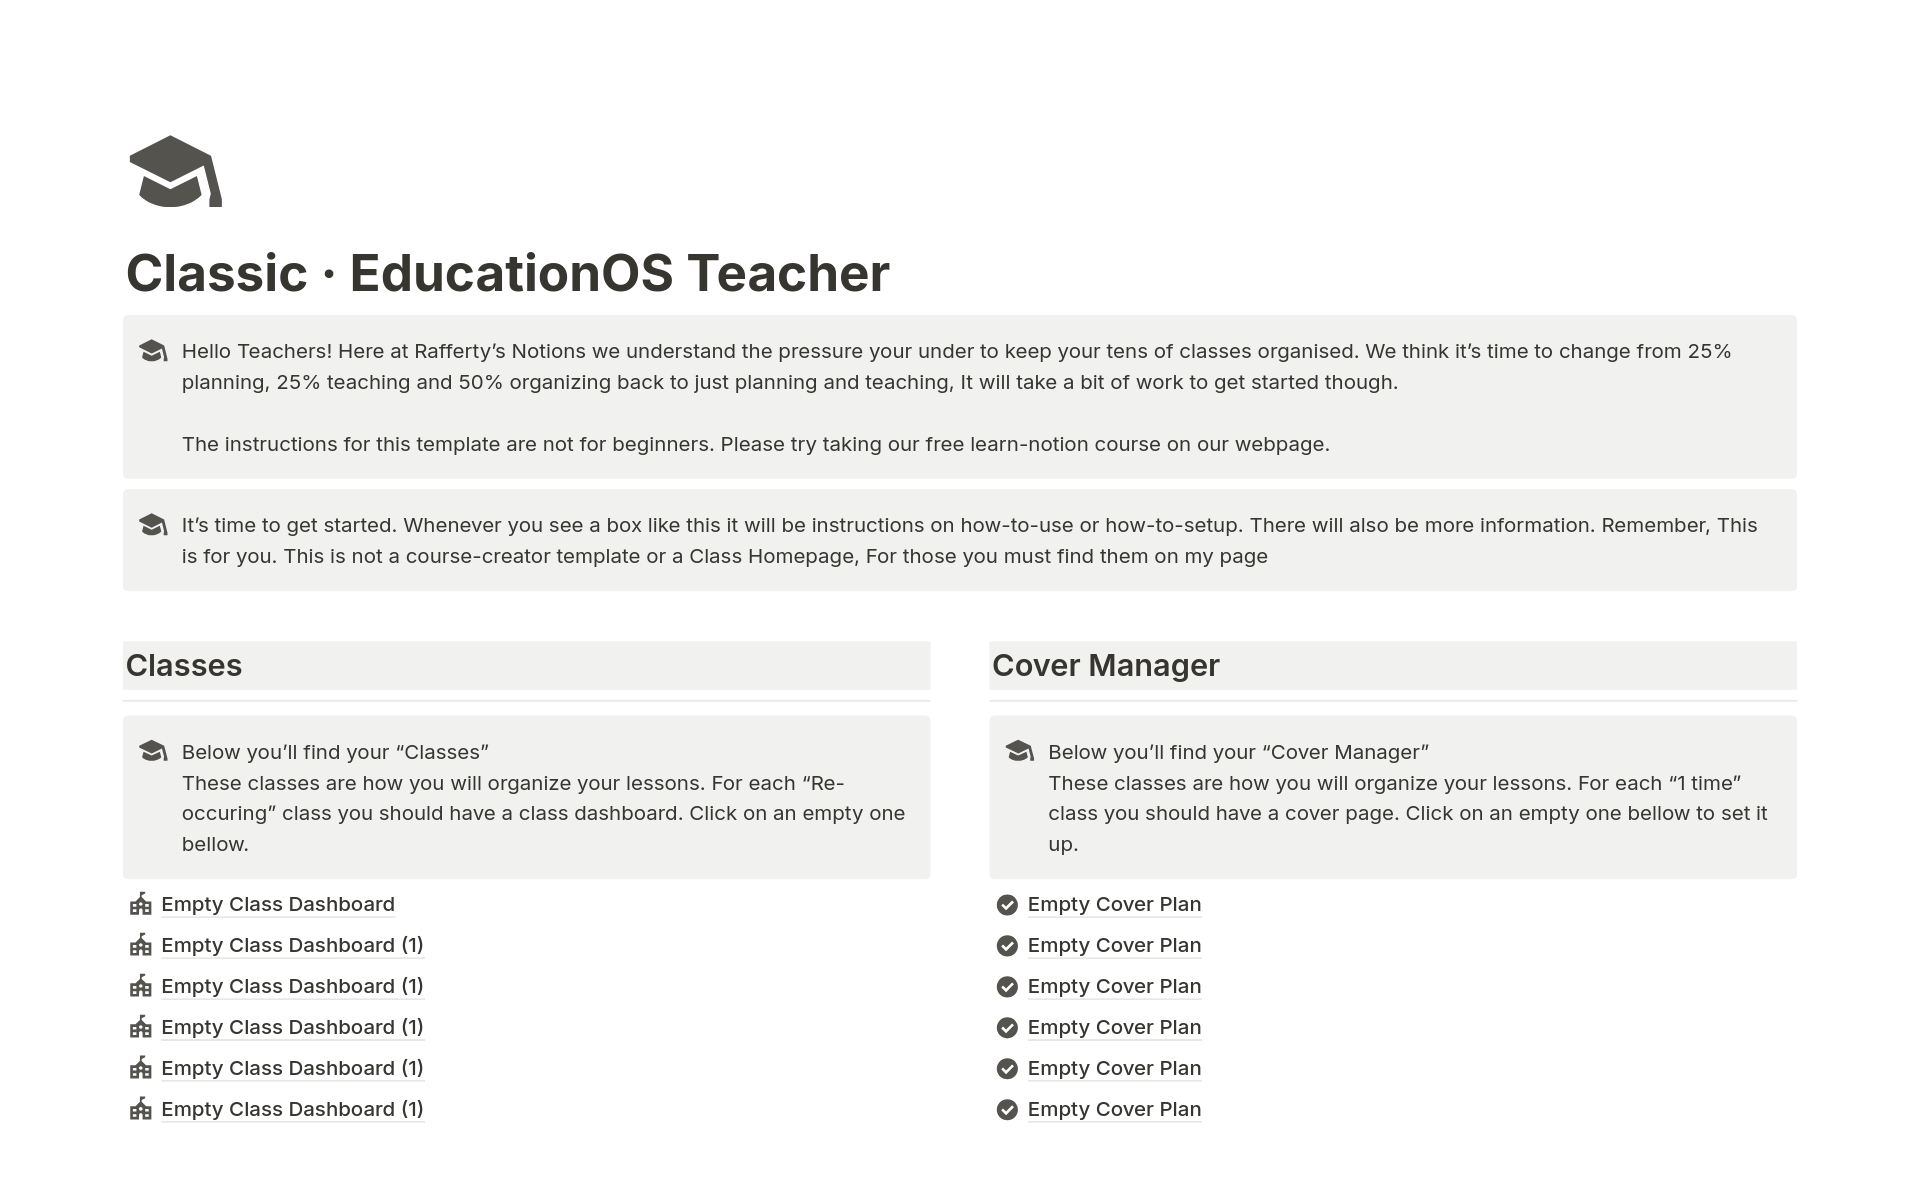 Classic EducationOS Teacher is a free notion template that helps teachers manage their classes